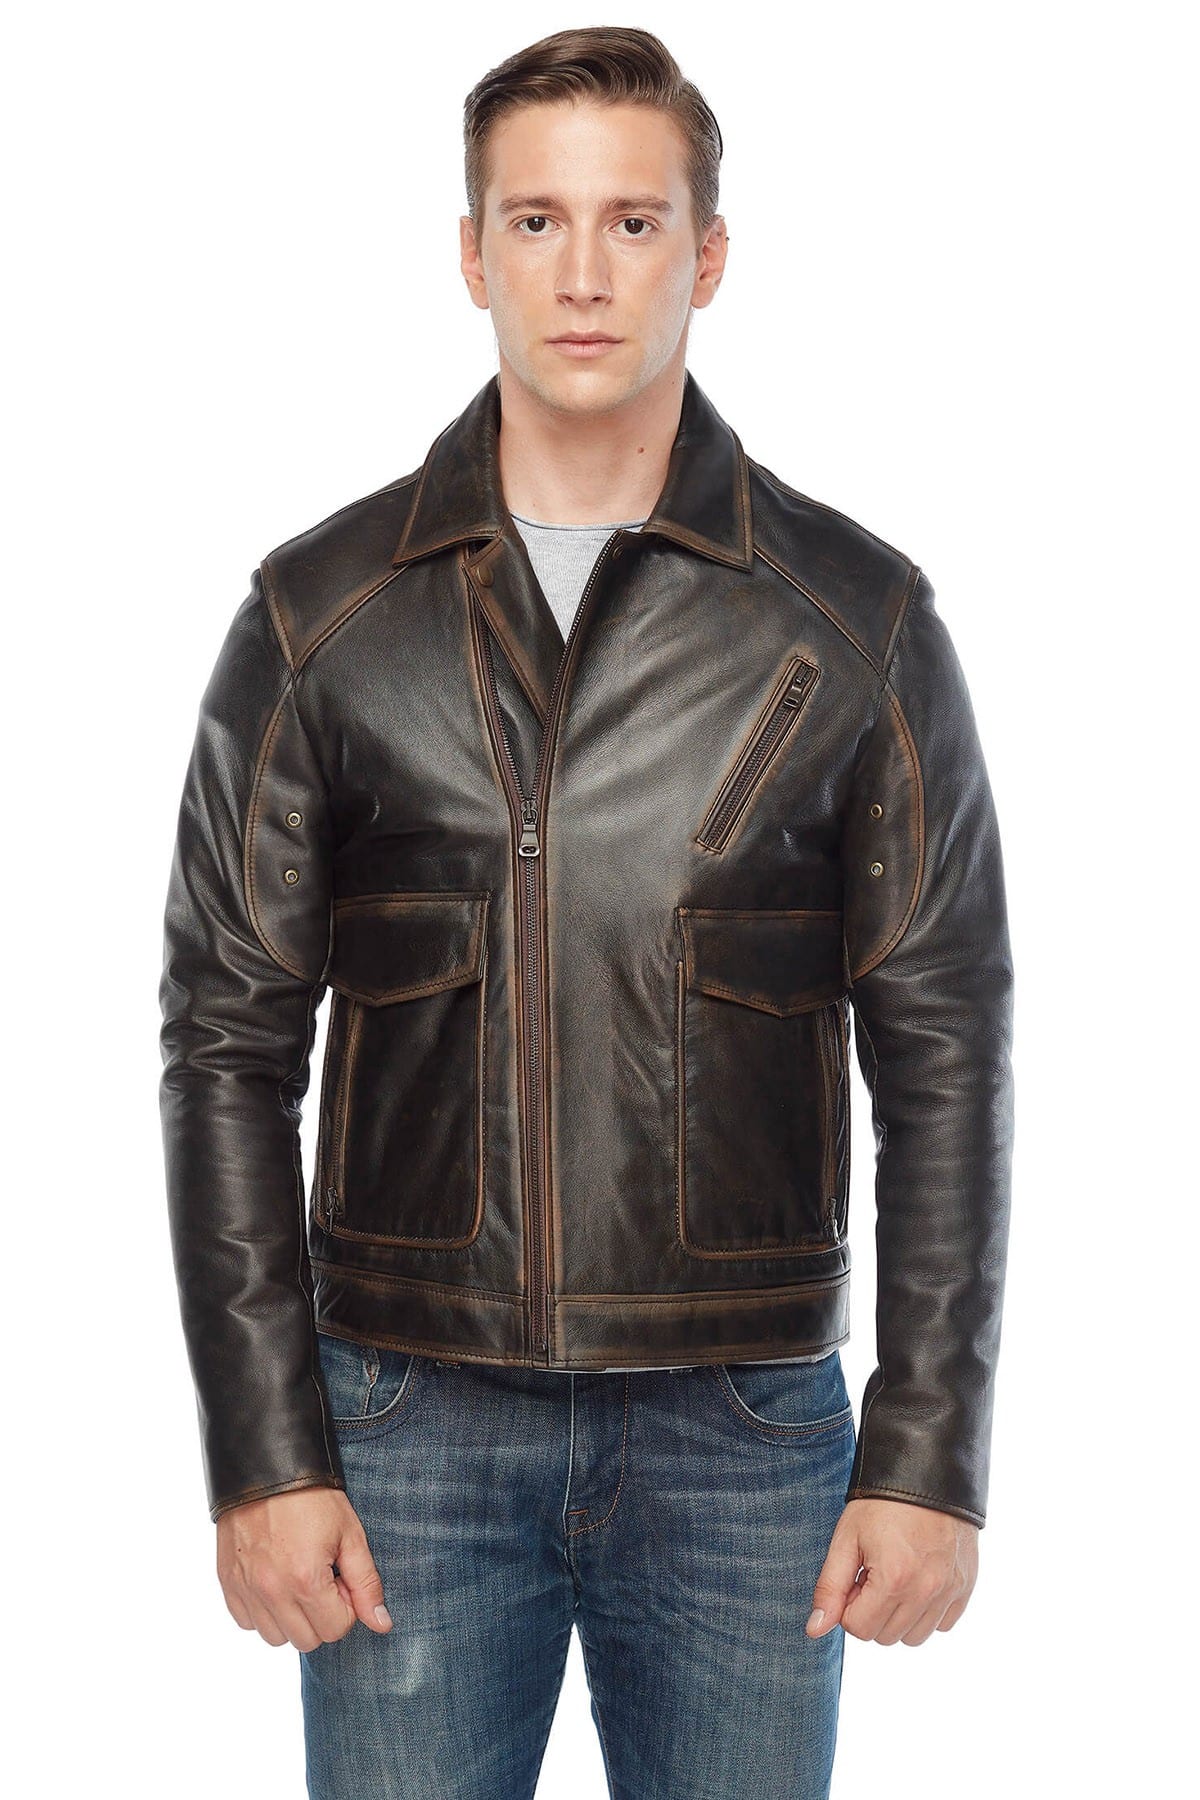 Marlon Blue Men's 100 % Real Brown/Light Brown Leather Distressed Jacket